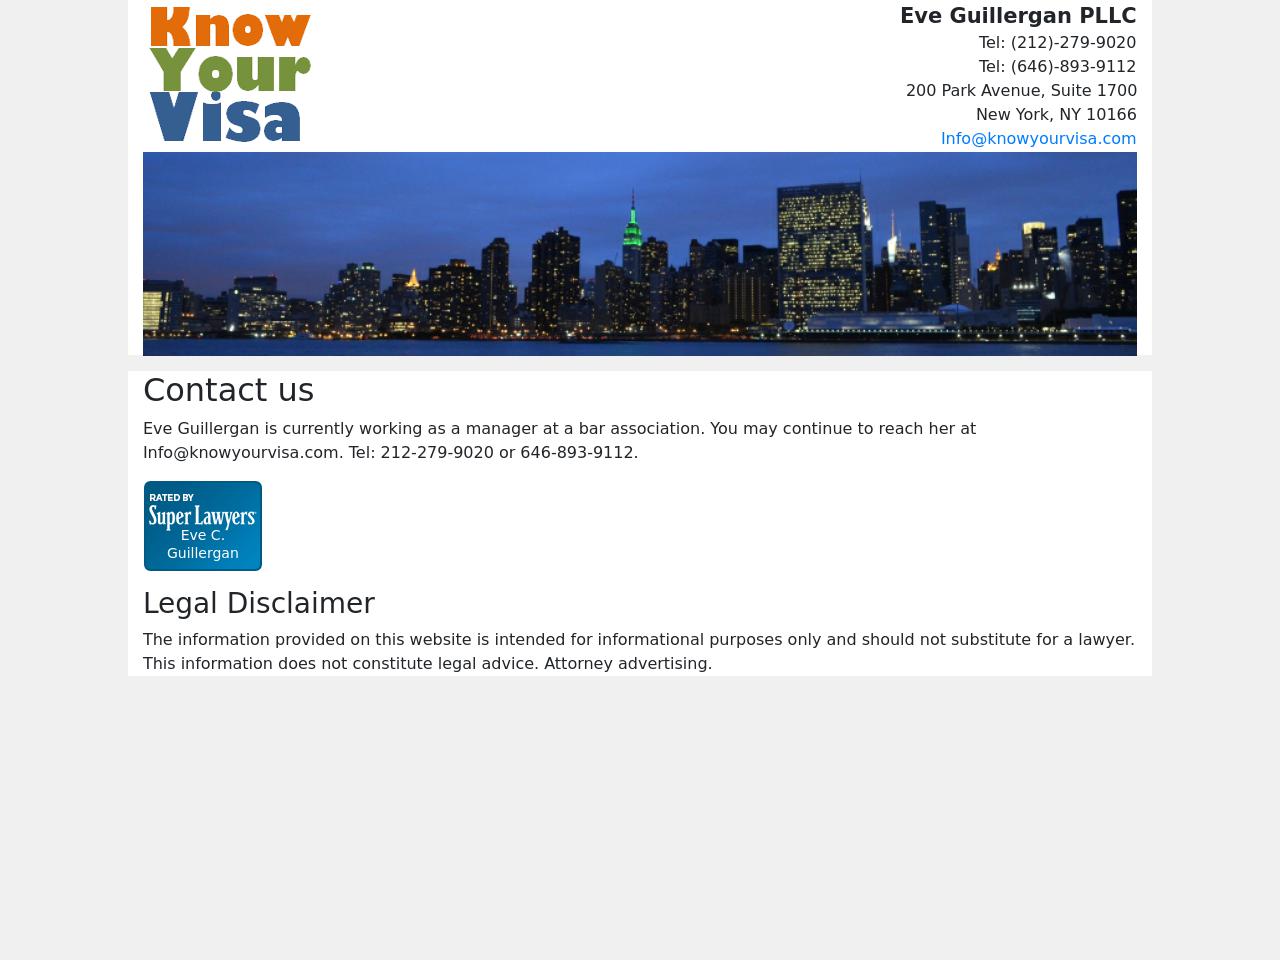 Eve Guillergan PLLC - New York NY Lawyers